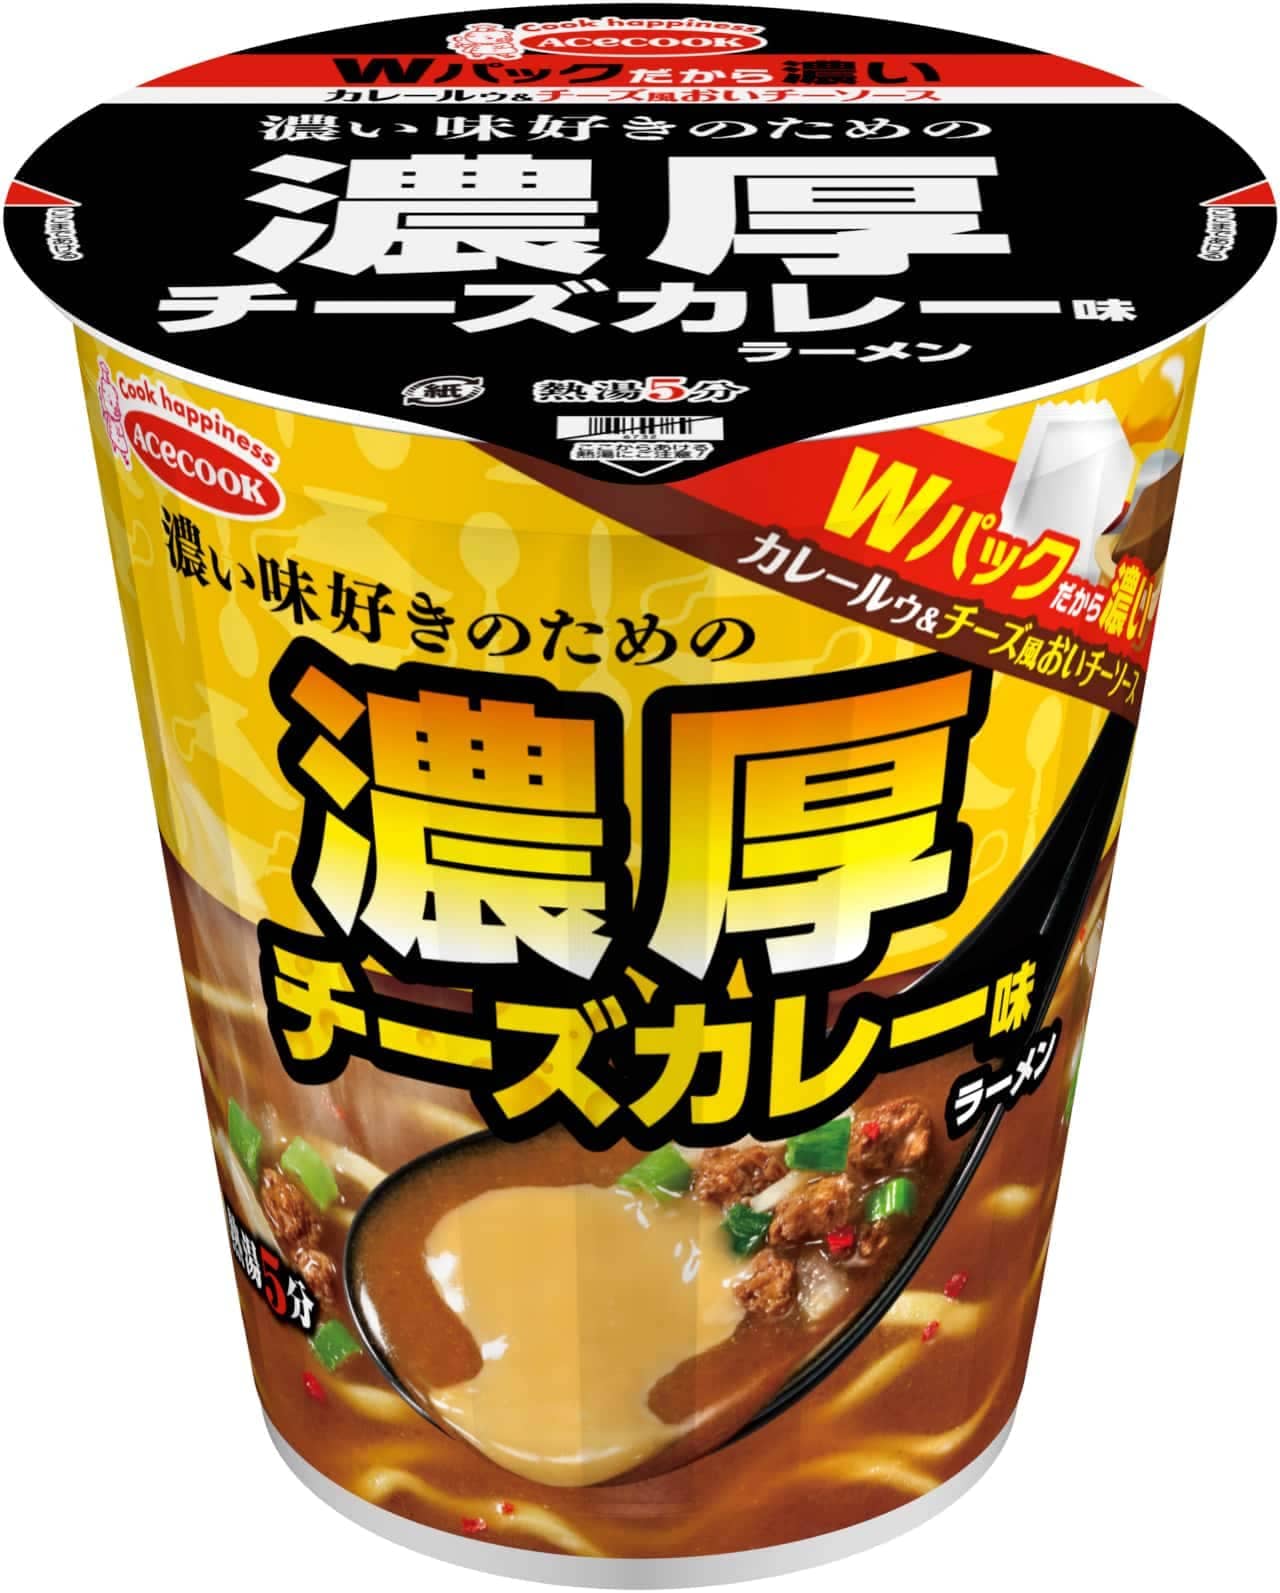 Ace Cook "Thick Cheese Curry Flavor Ramen for Strong Taste Lovers